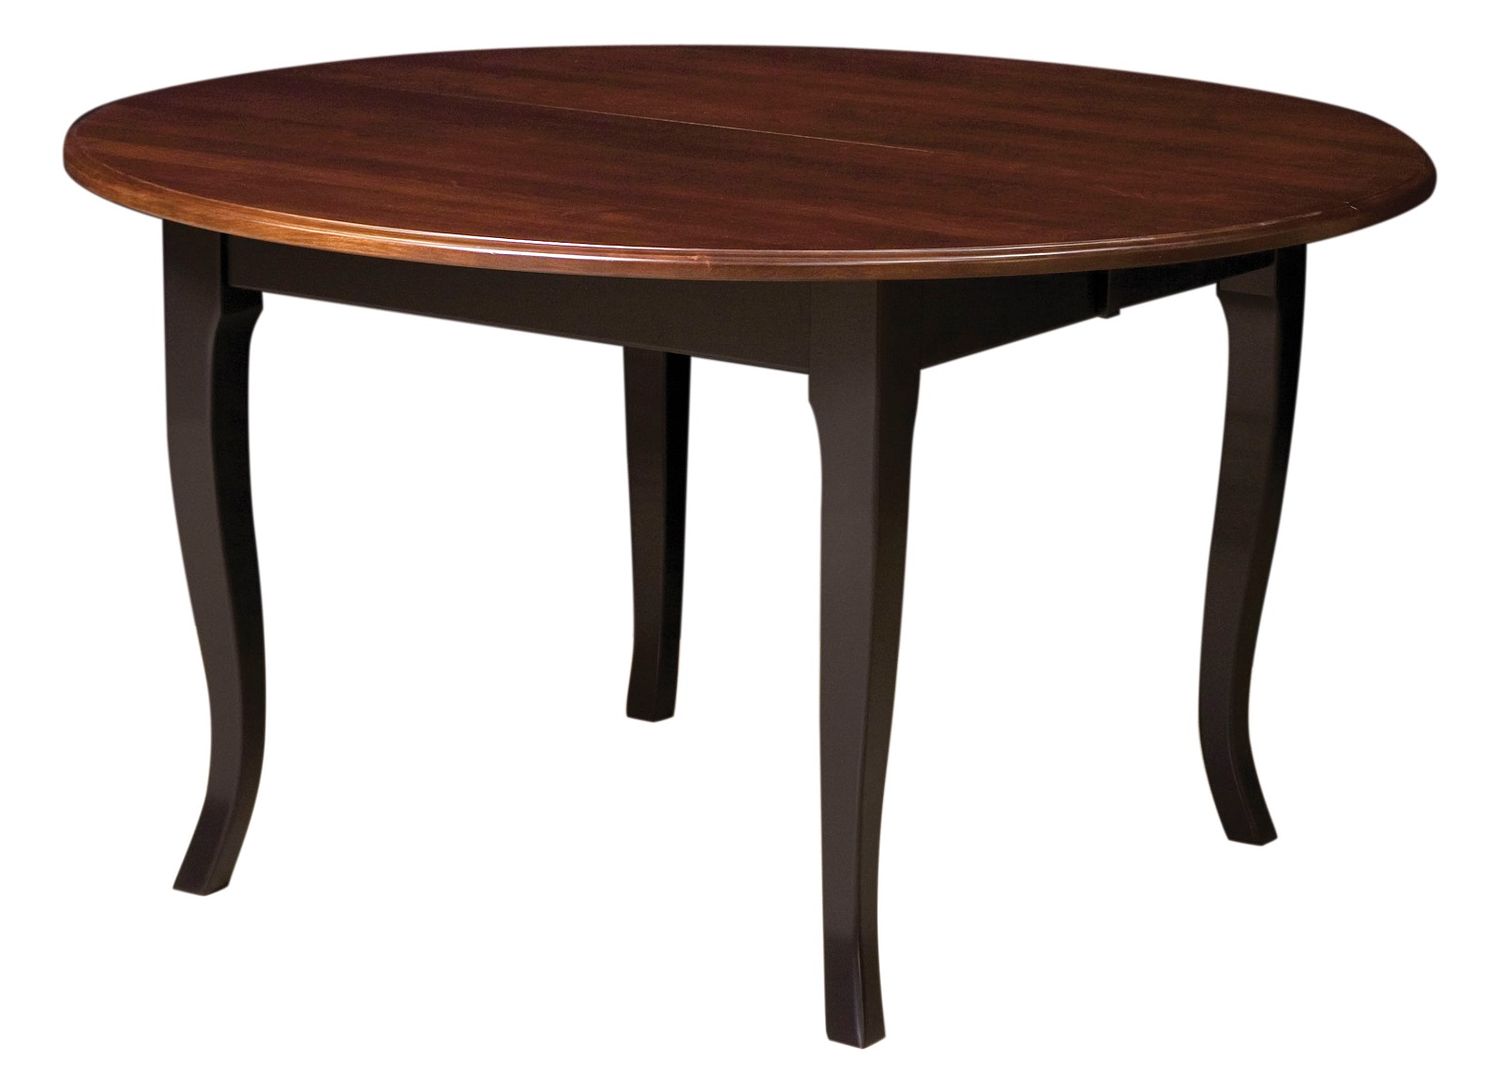 Amish Round Dining Table Chairs Set Solid Wood Leg 2 Tone Modern Country Black